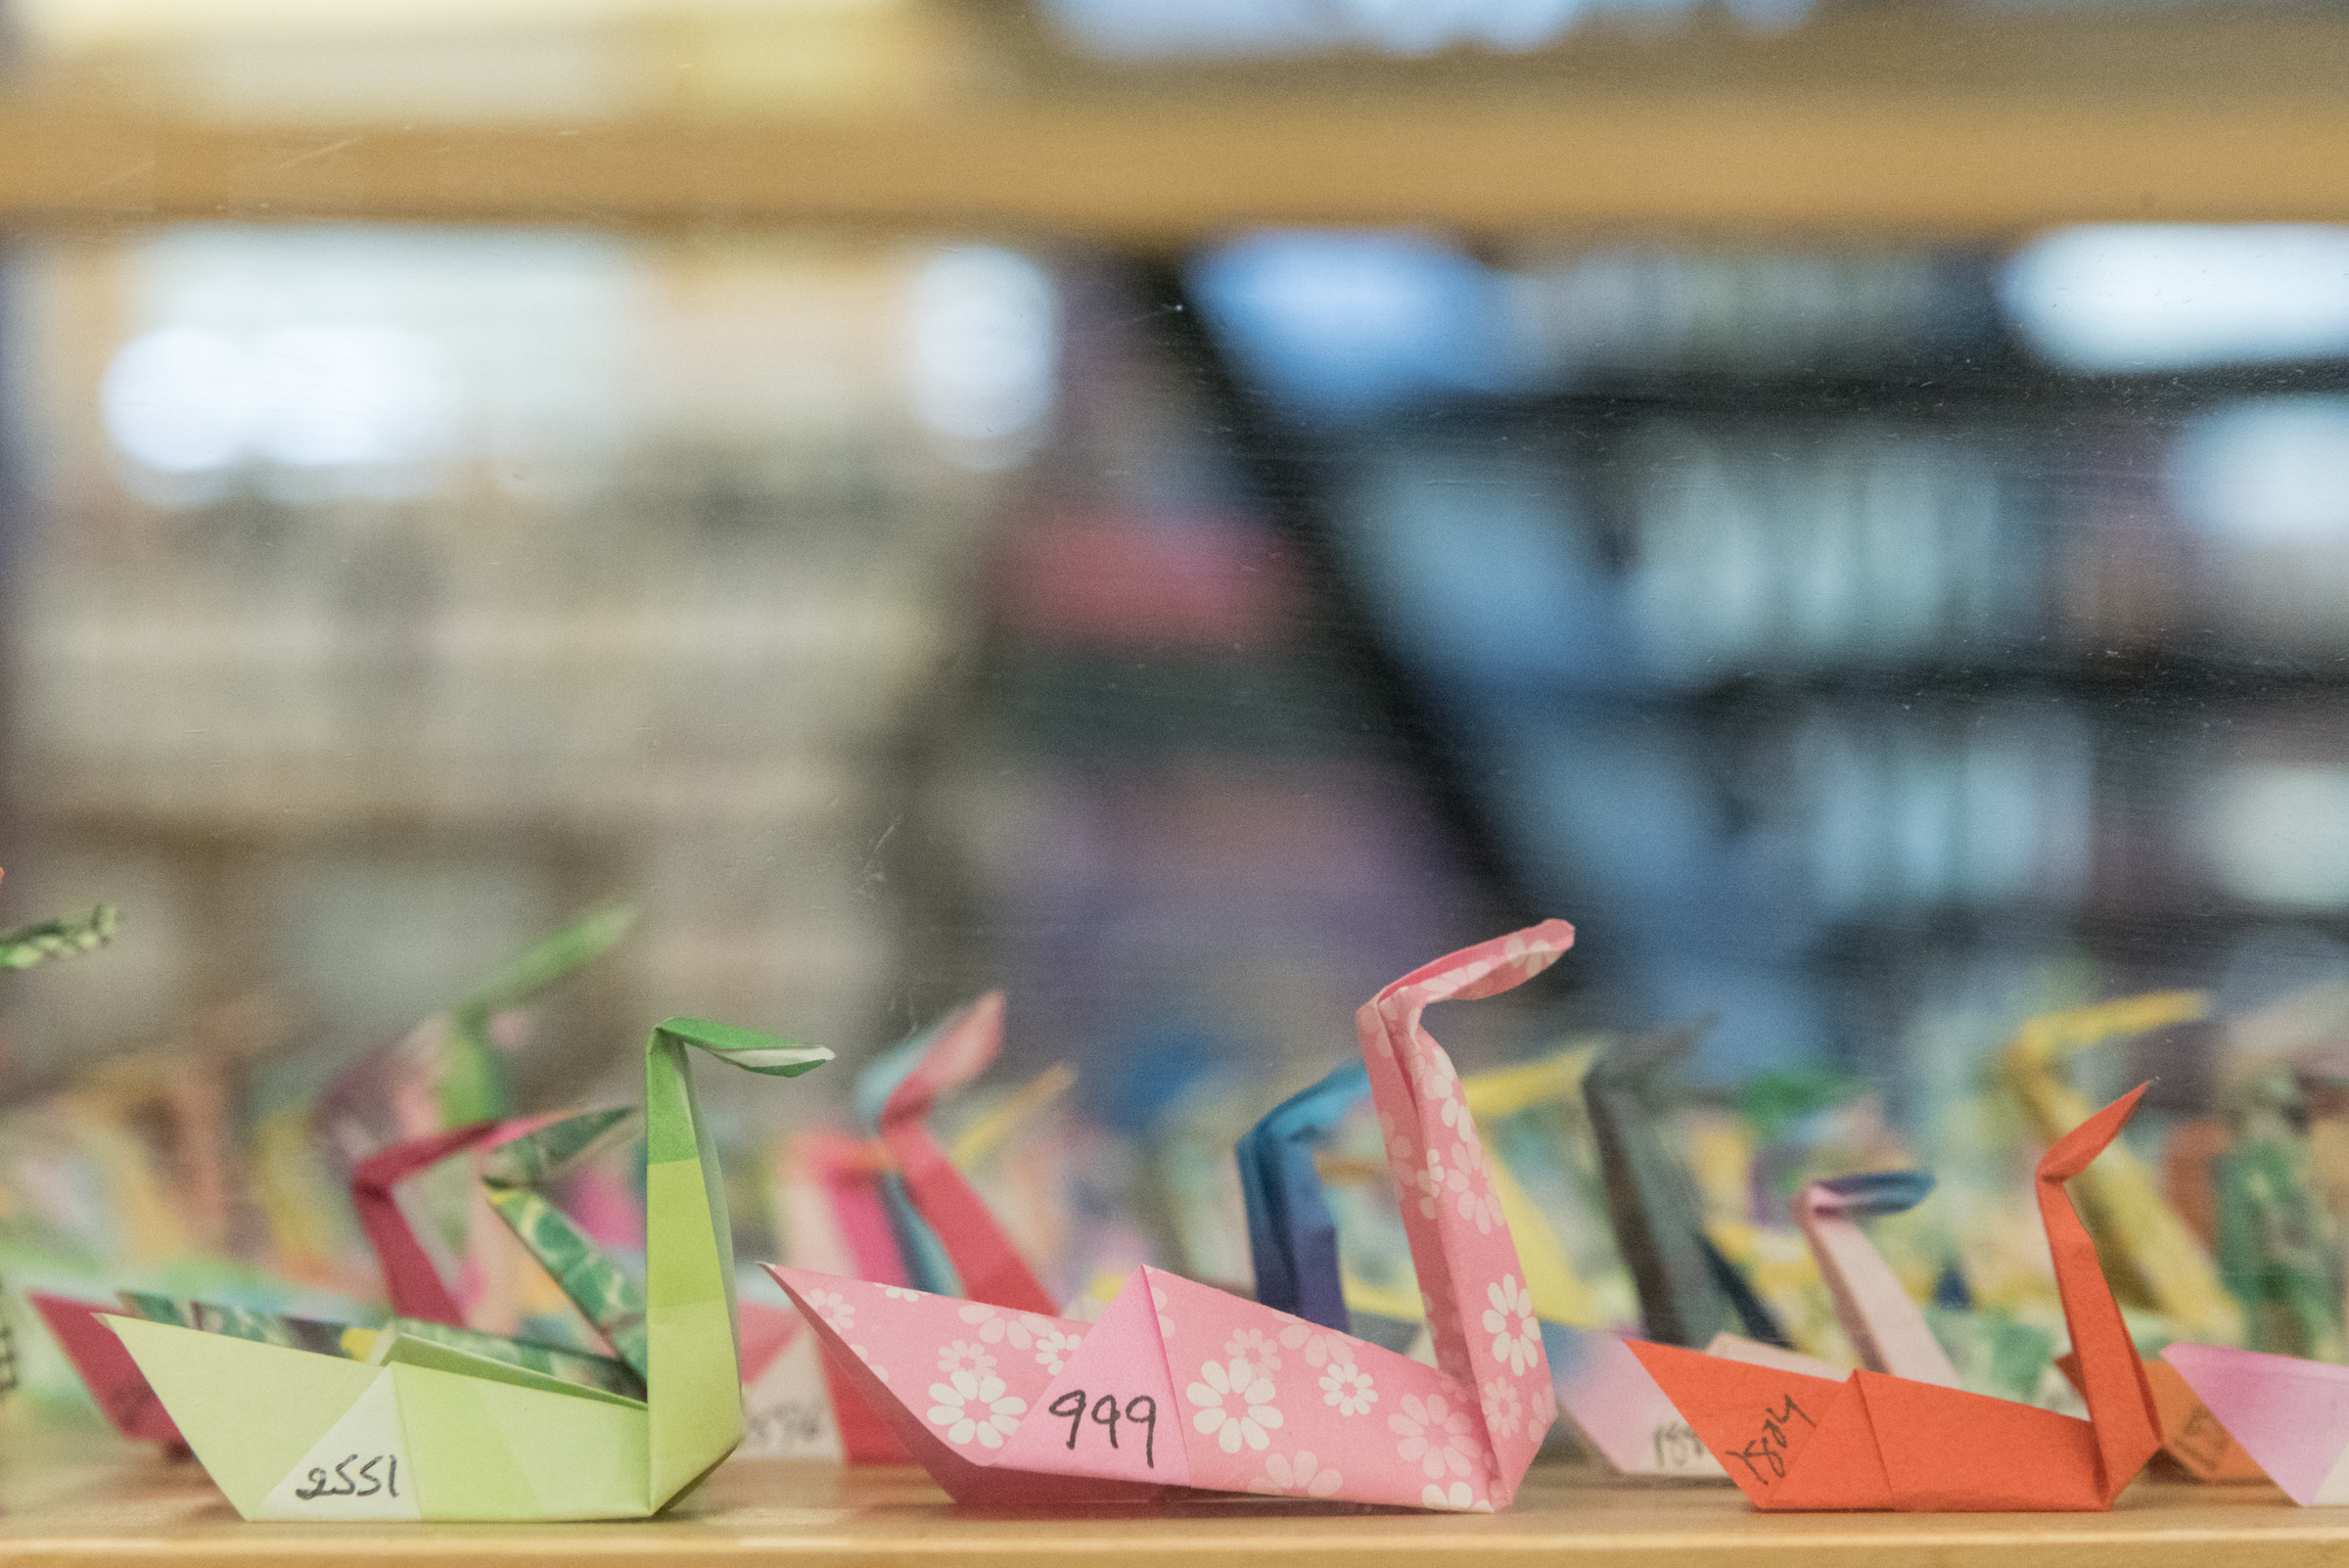 How To Make Origami Swans Thousands Of Paper Swans Honor Children Separated At The Border